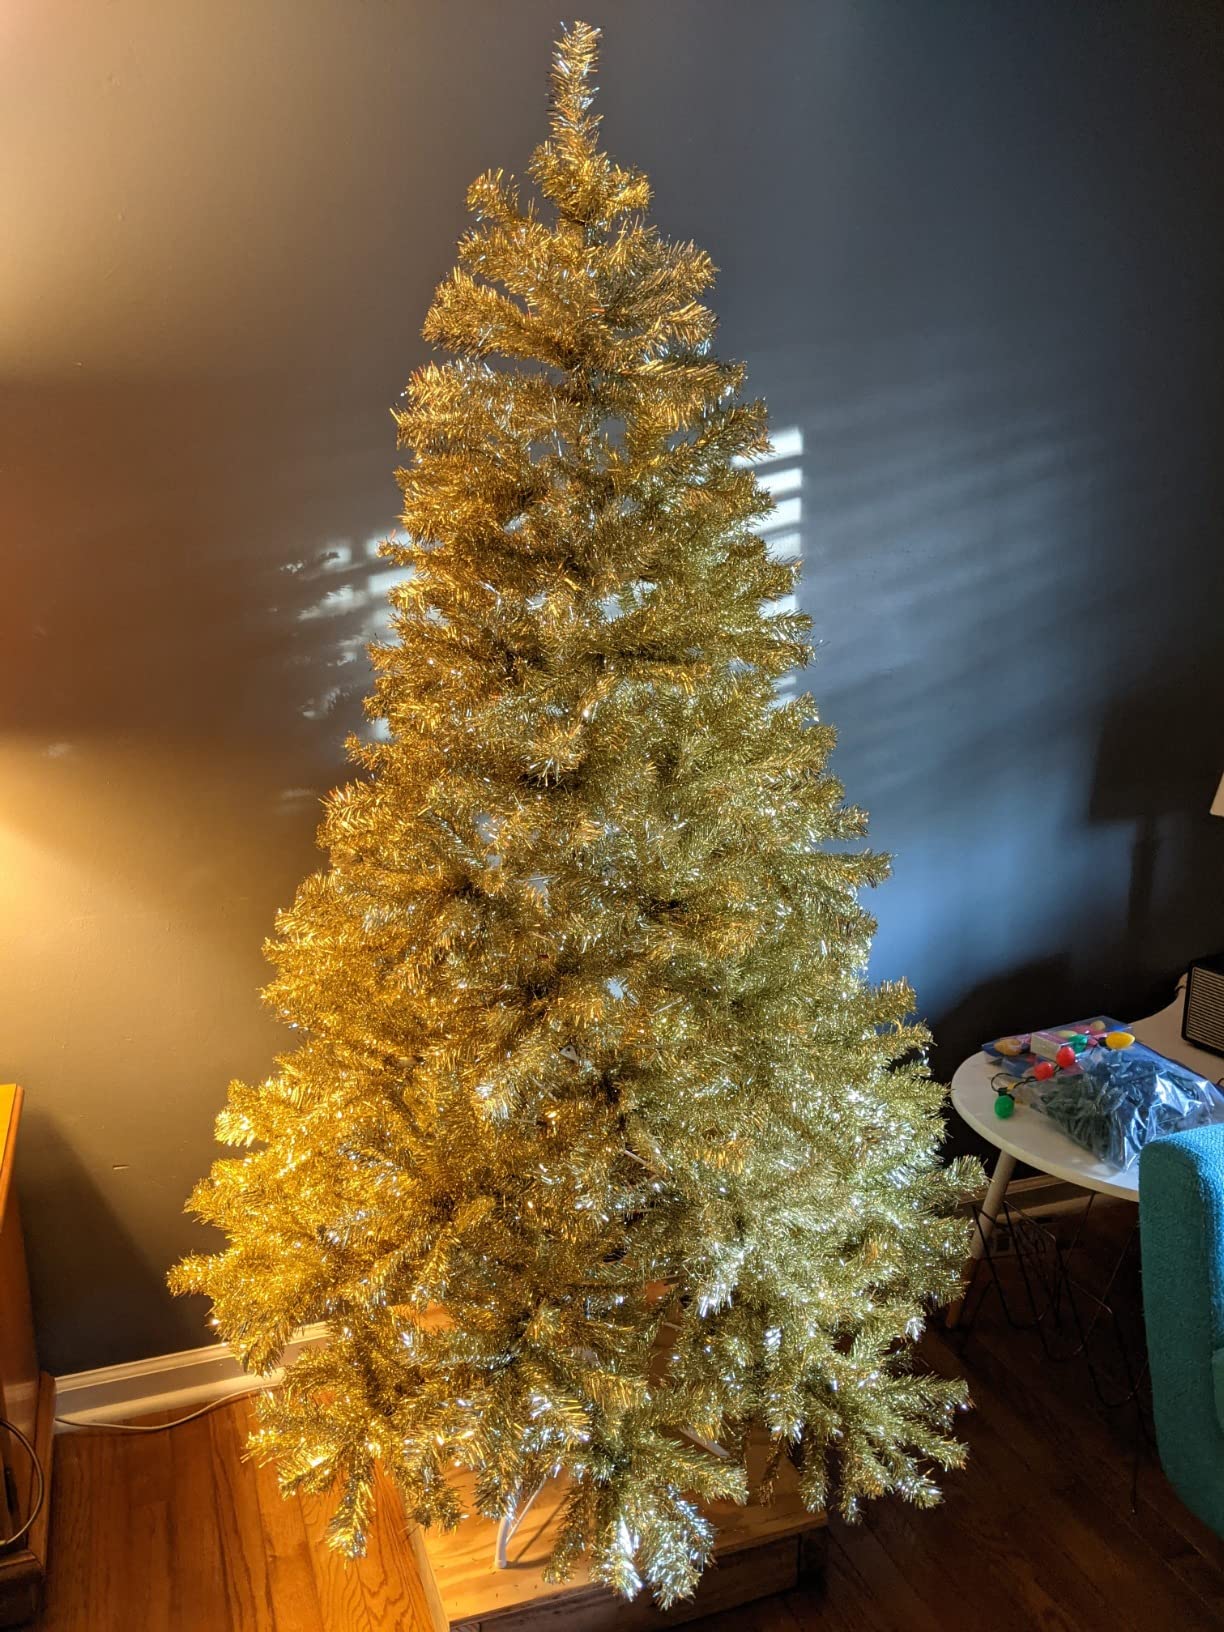 Best fake tree I've bought in a while.